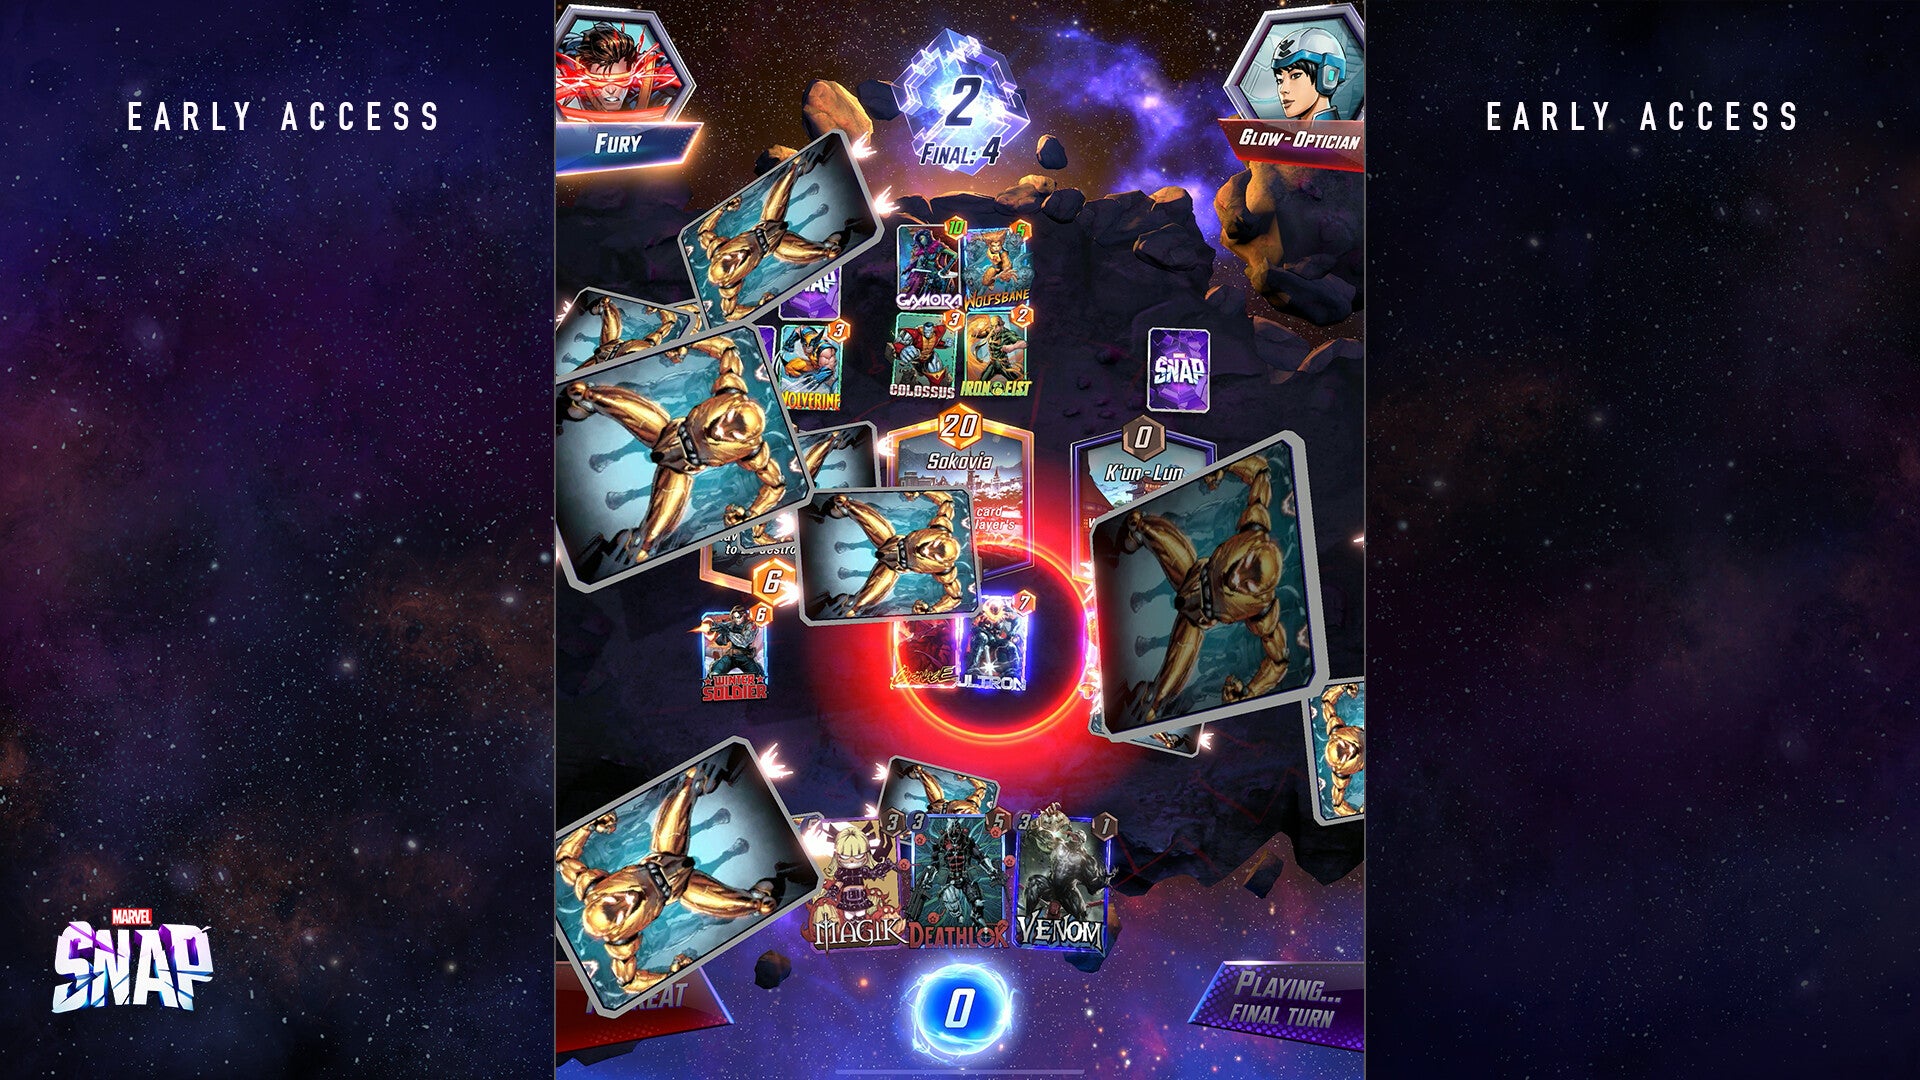 The digital card game Marvel Snap. Copies of one card flood the screen.